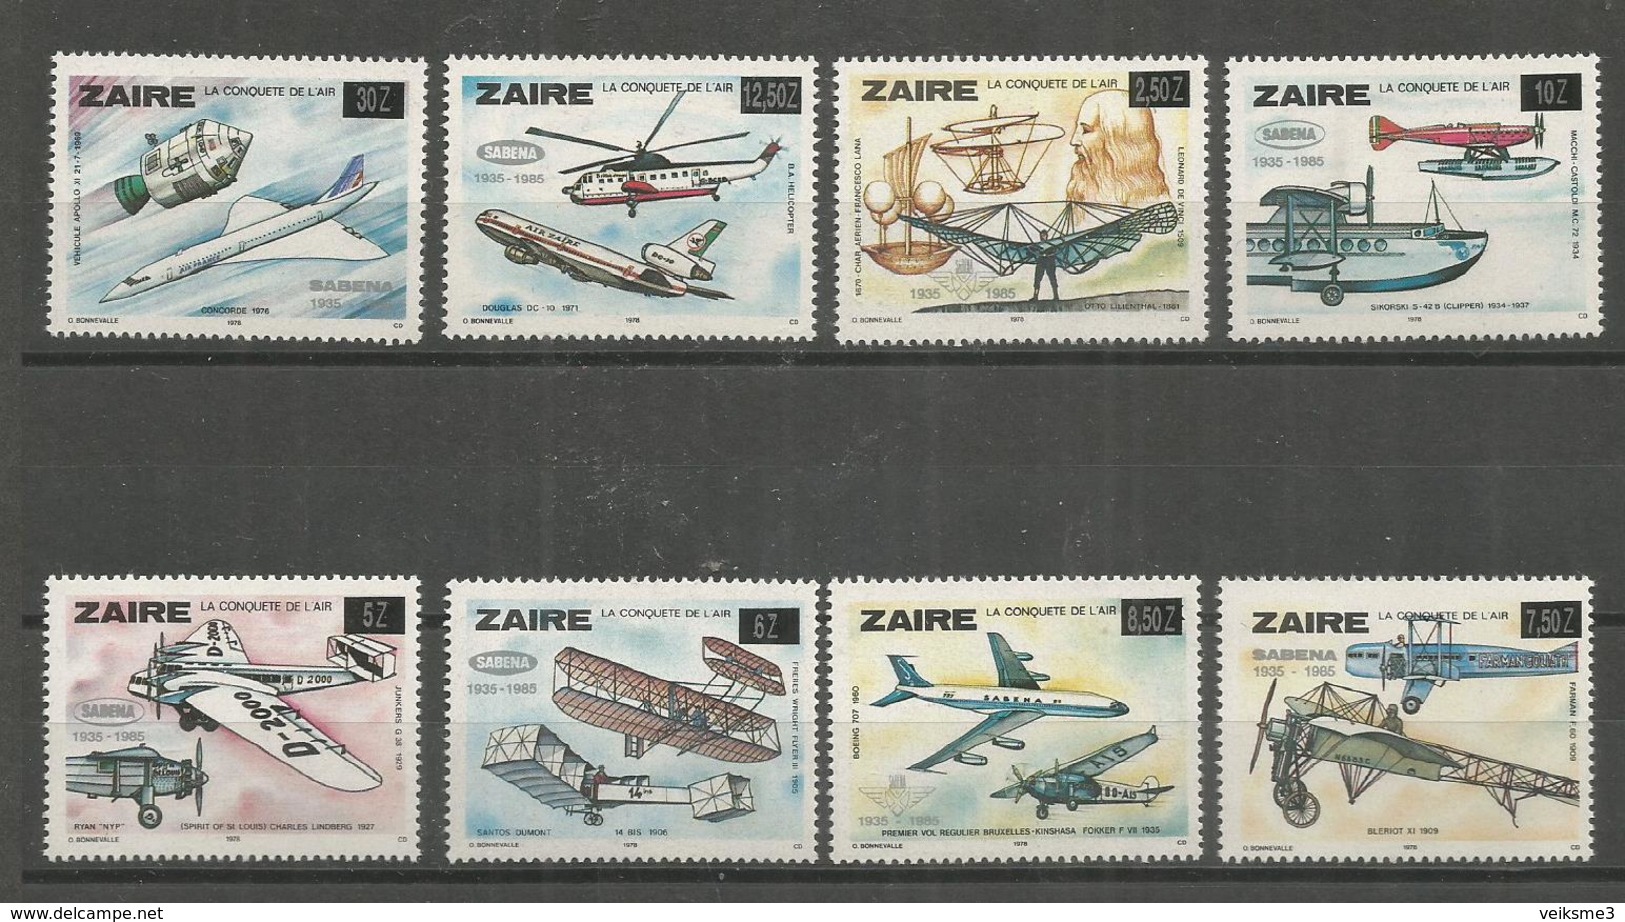 ZAIRE - MNH - Transport - Airplanes - New Currency - Aerei